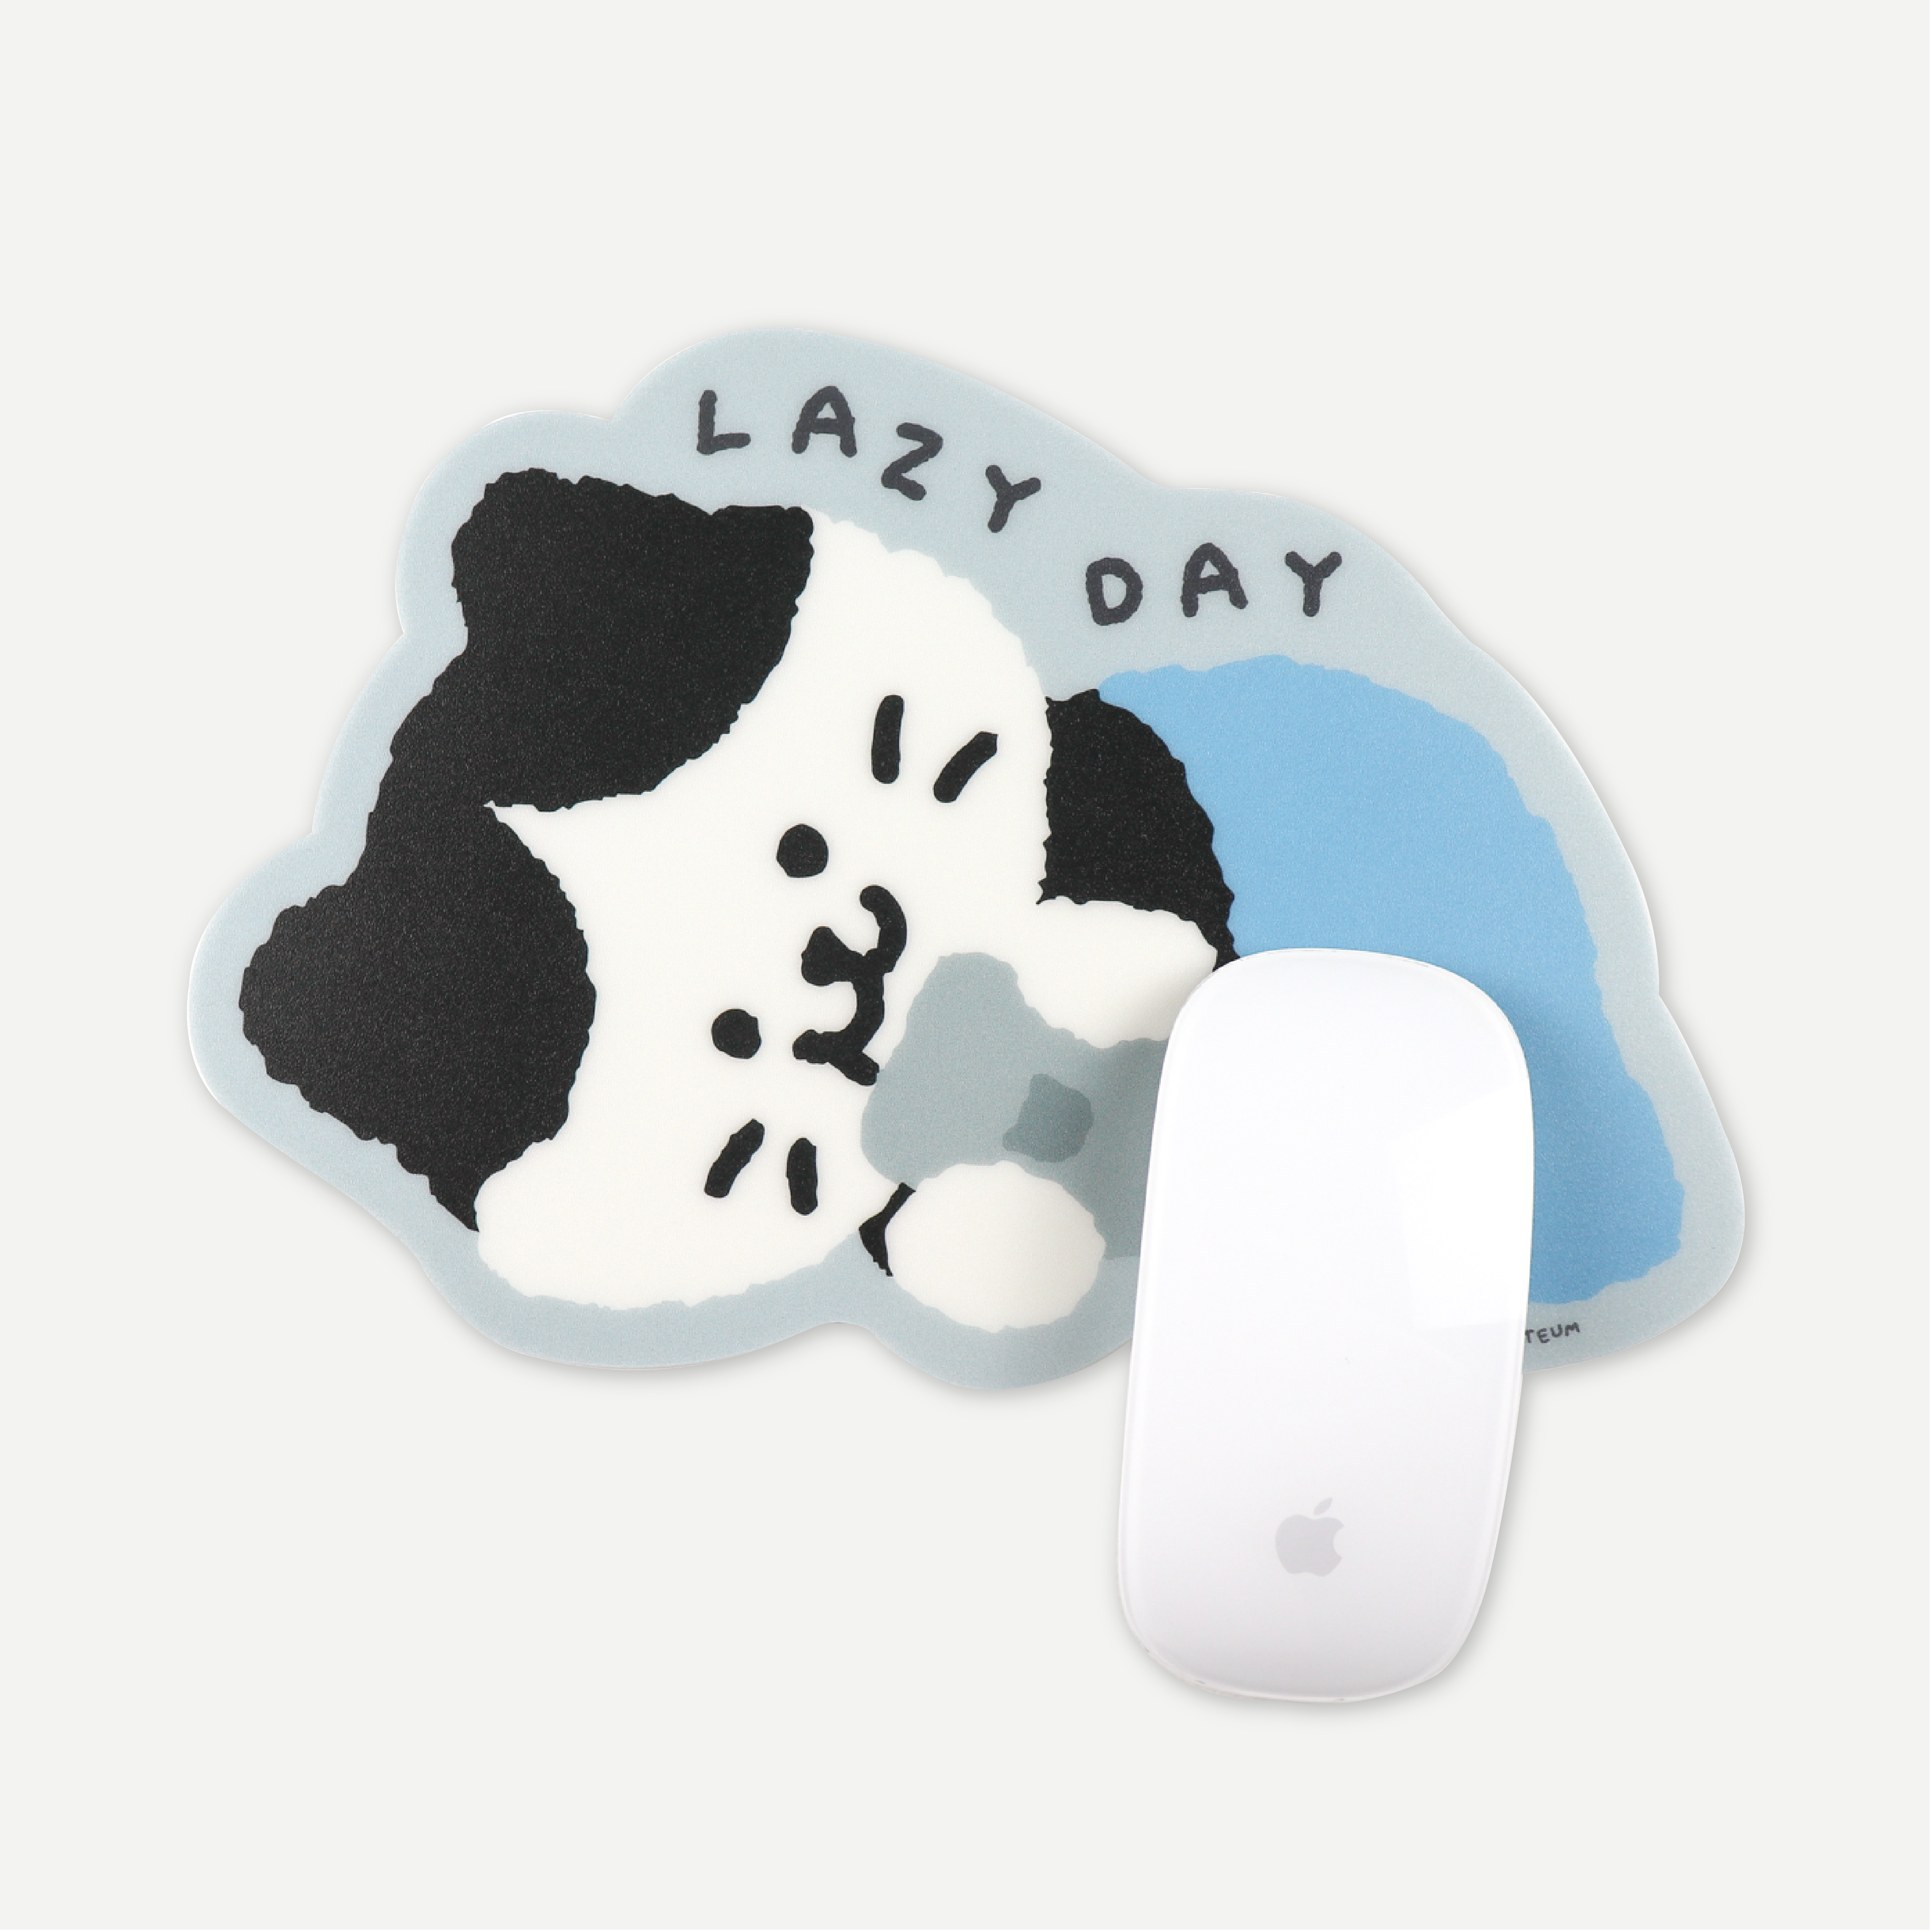 PEPPER&#039;S LAZY DAY MOUSE PAD